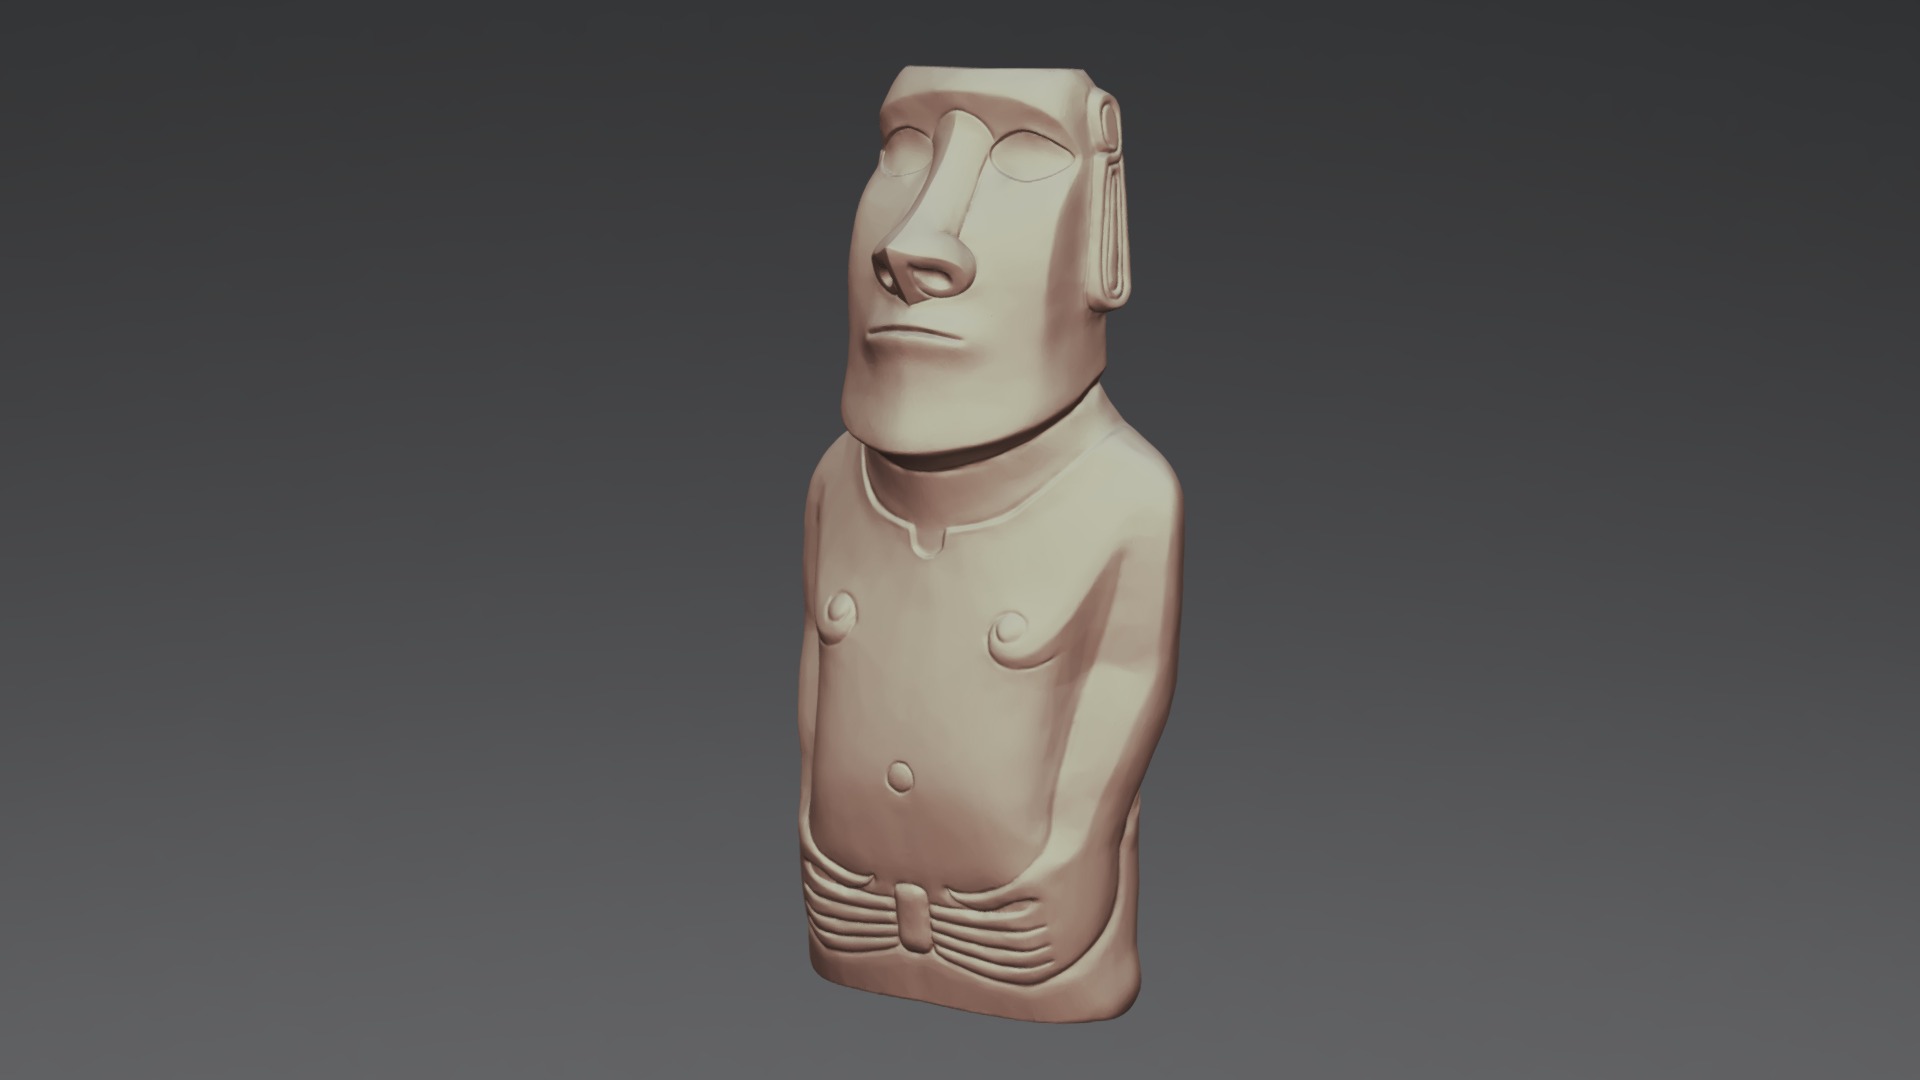 3D model Moai study V1 - This is a 3D model of the Moai study V1. The 3D model is about a statue of a person.